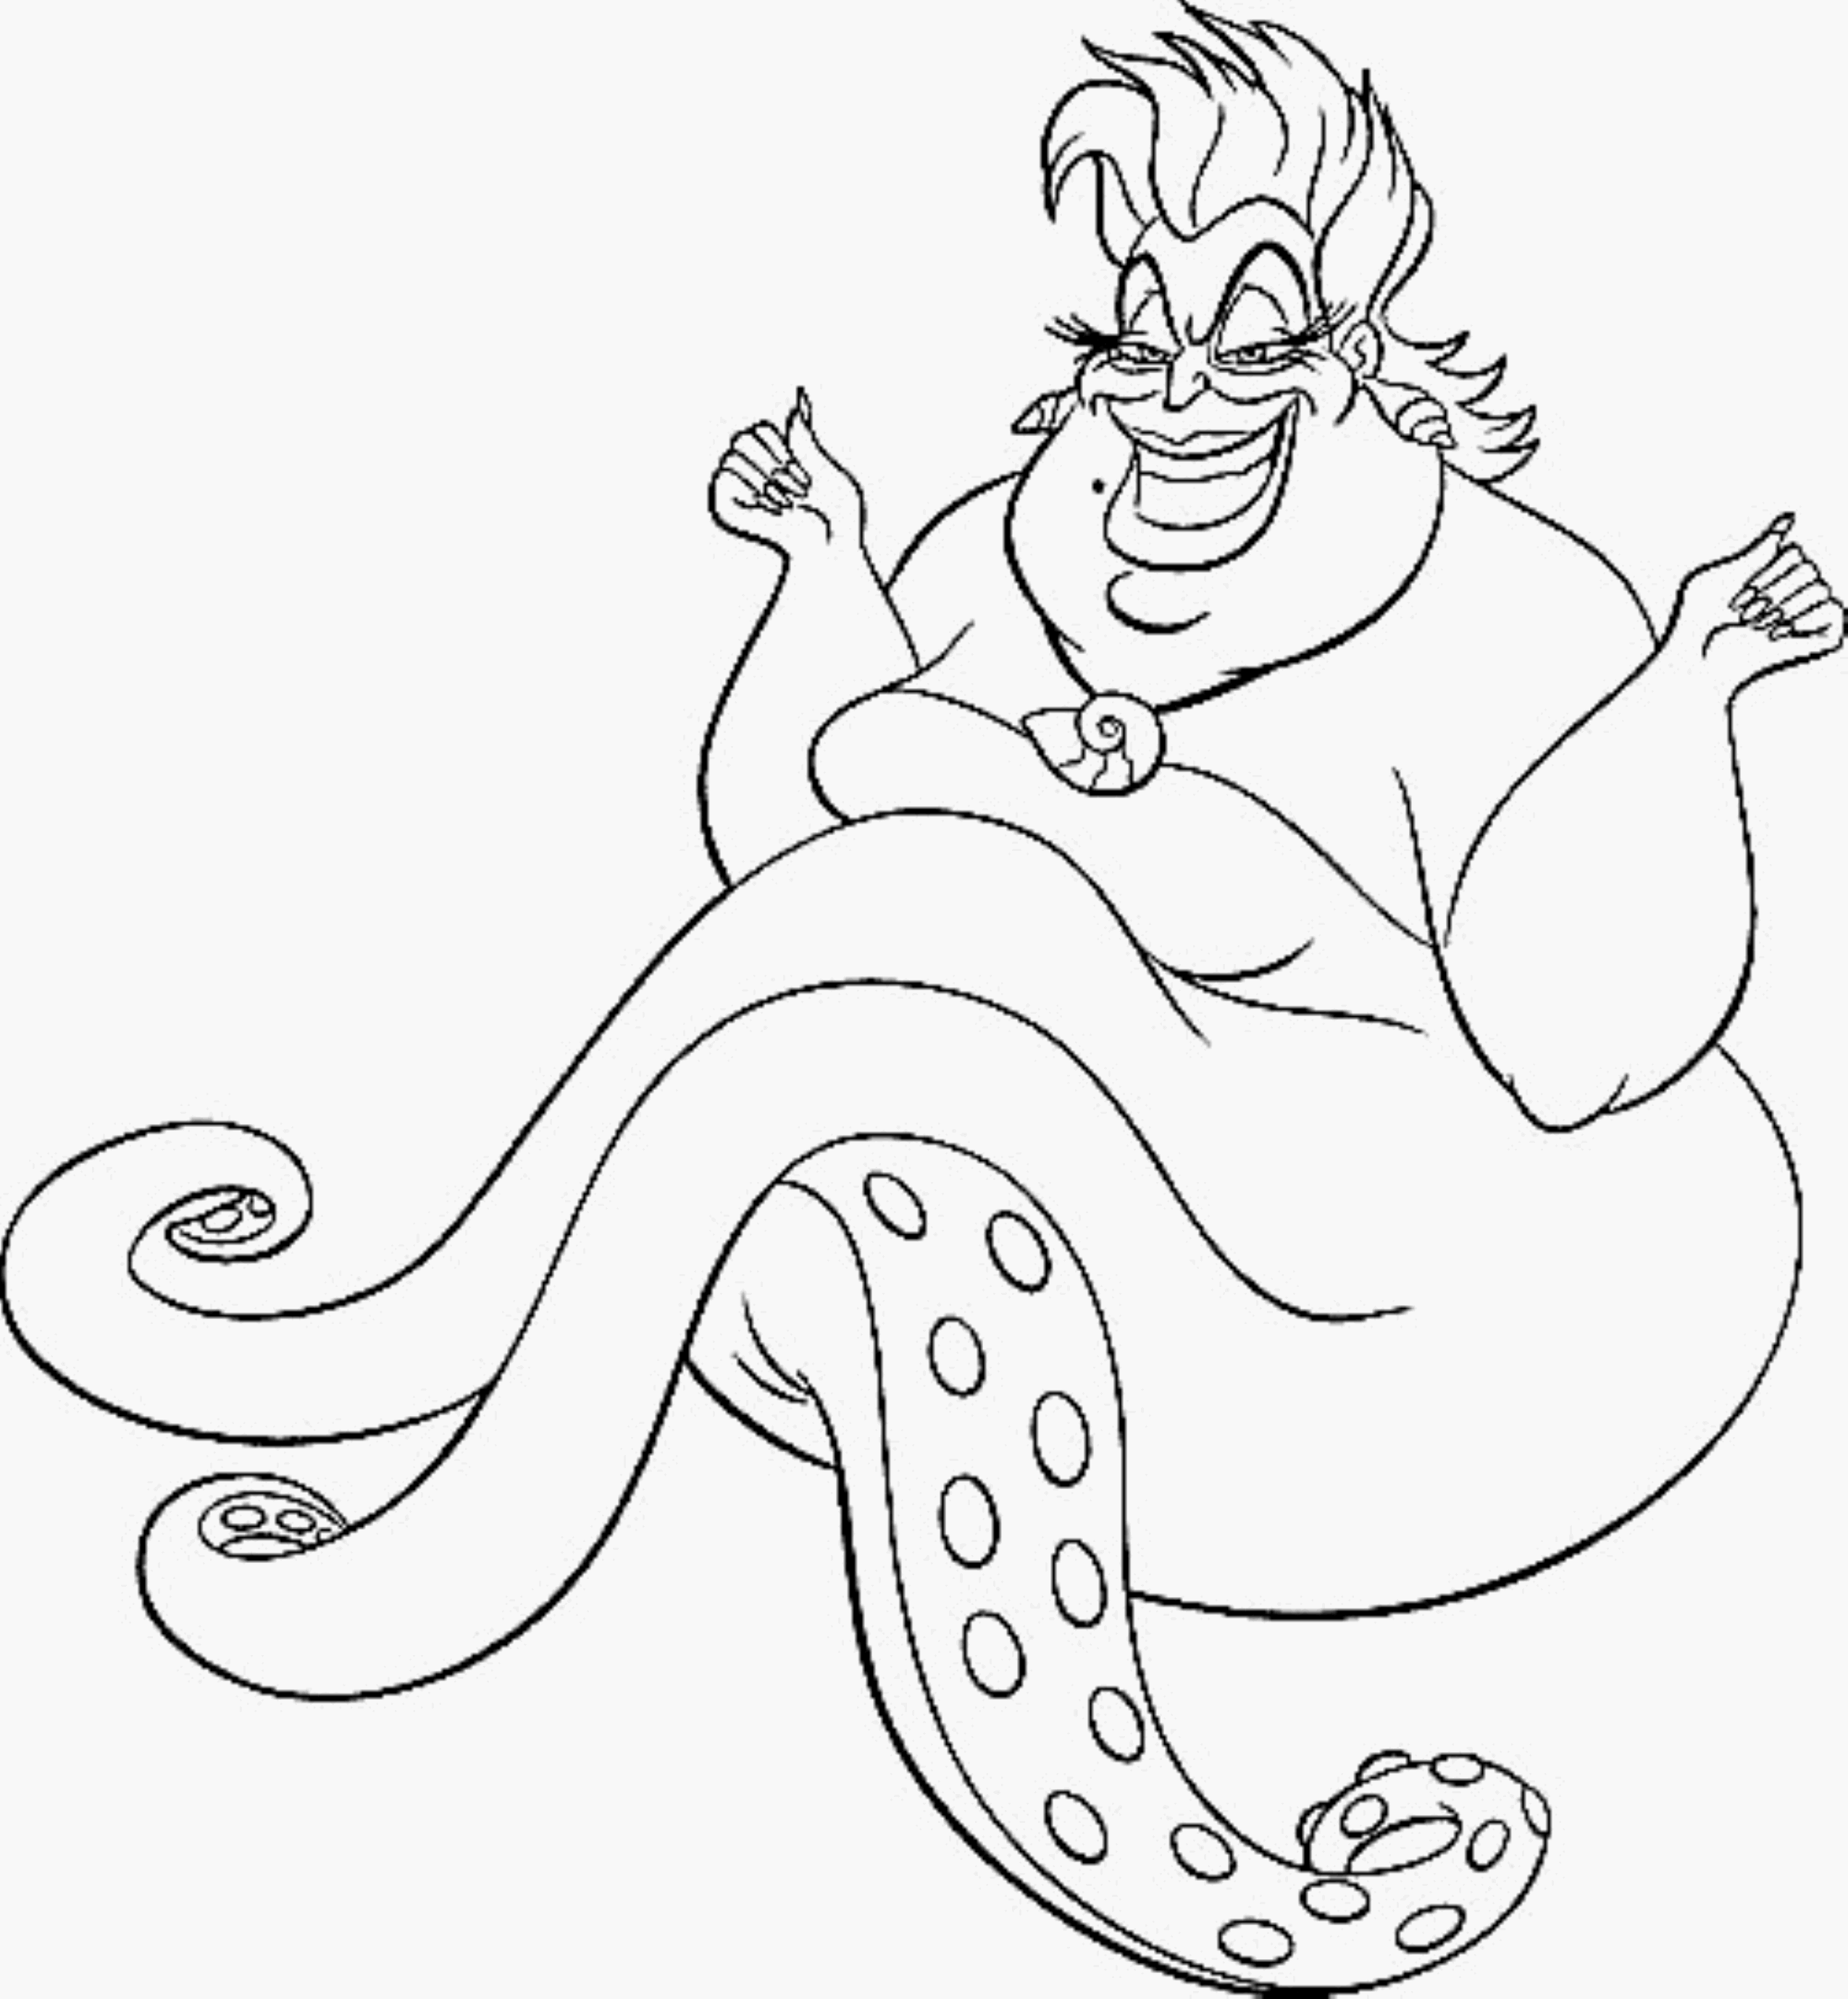 ursula-from-the-little-mermaid-coloring-pages-printable-kids